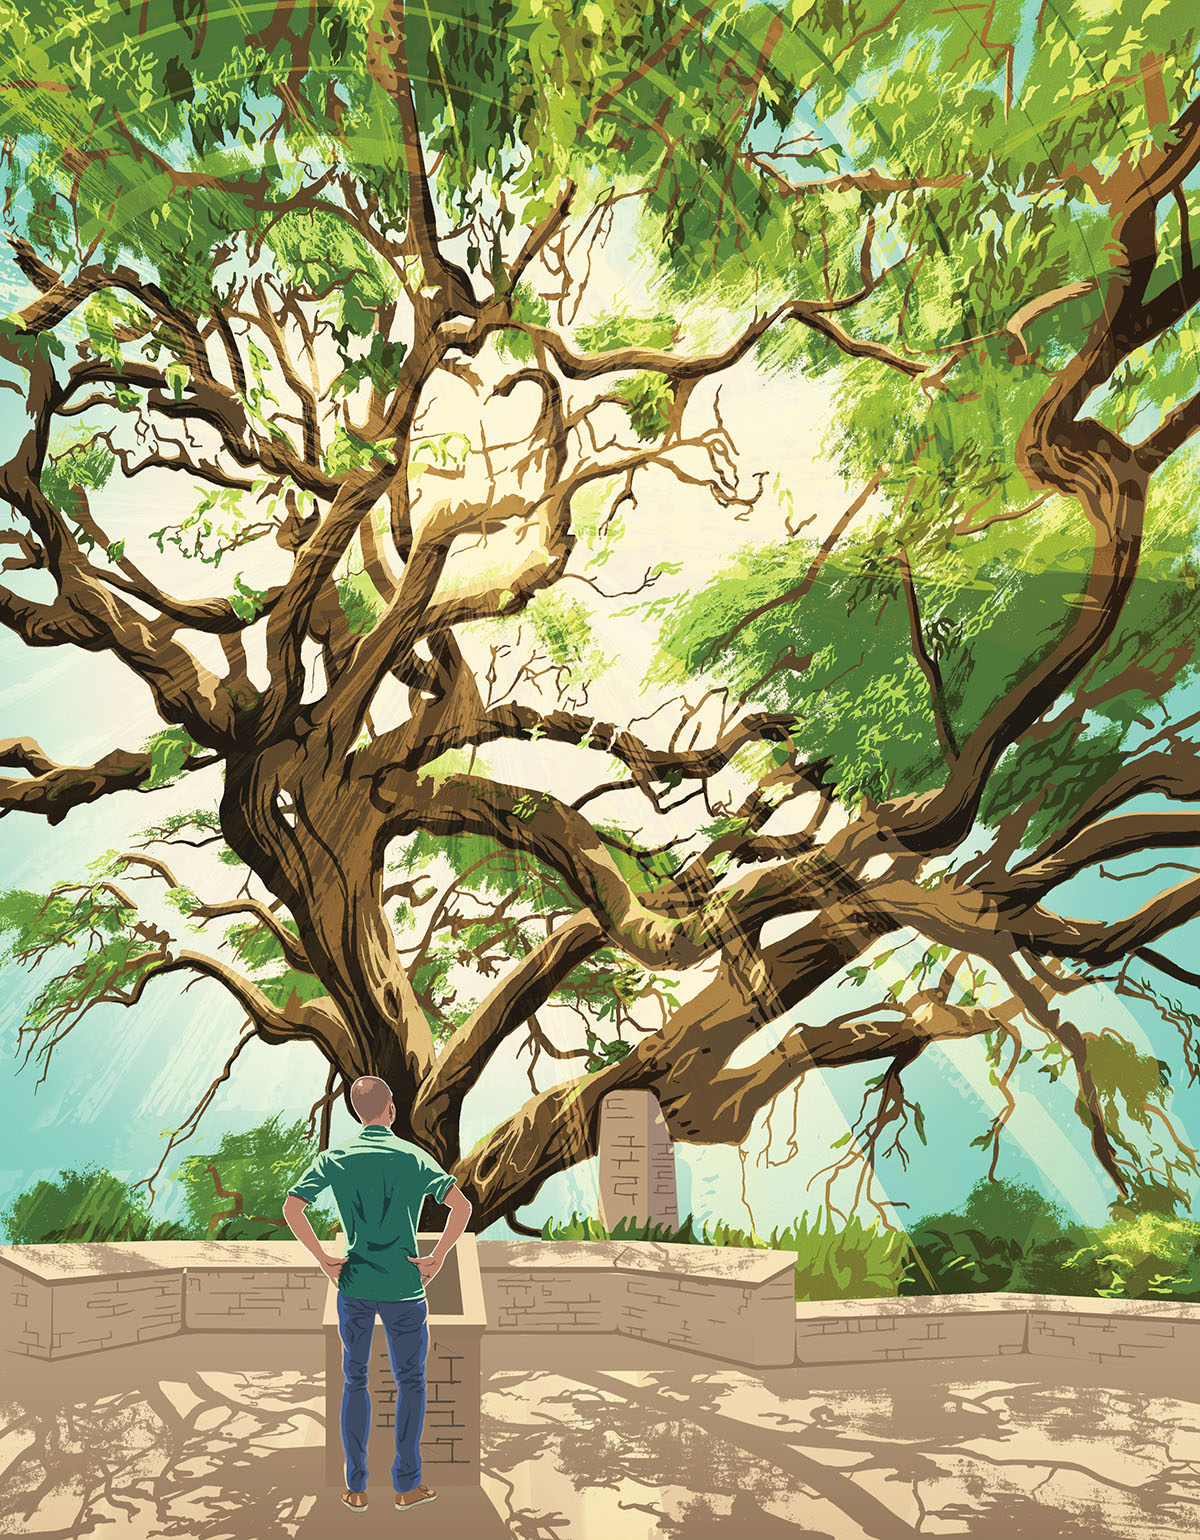 An illustration of a man standing in front of a rock wall looking up at a large oak tree